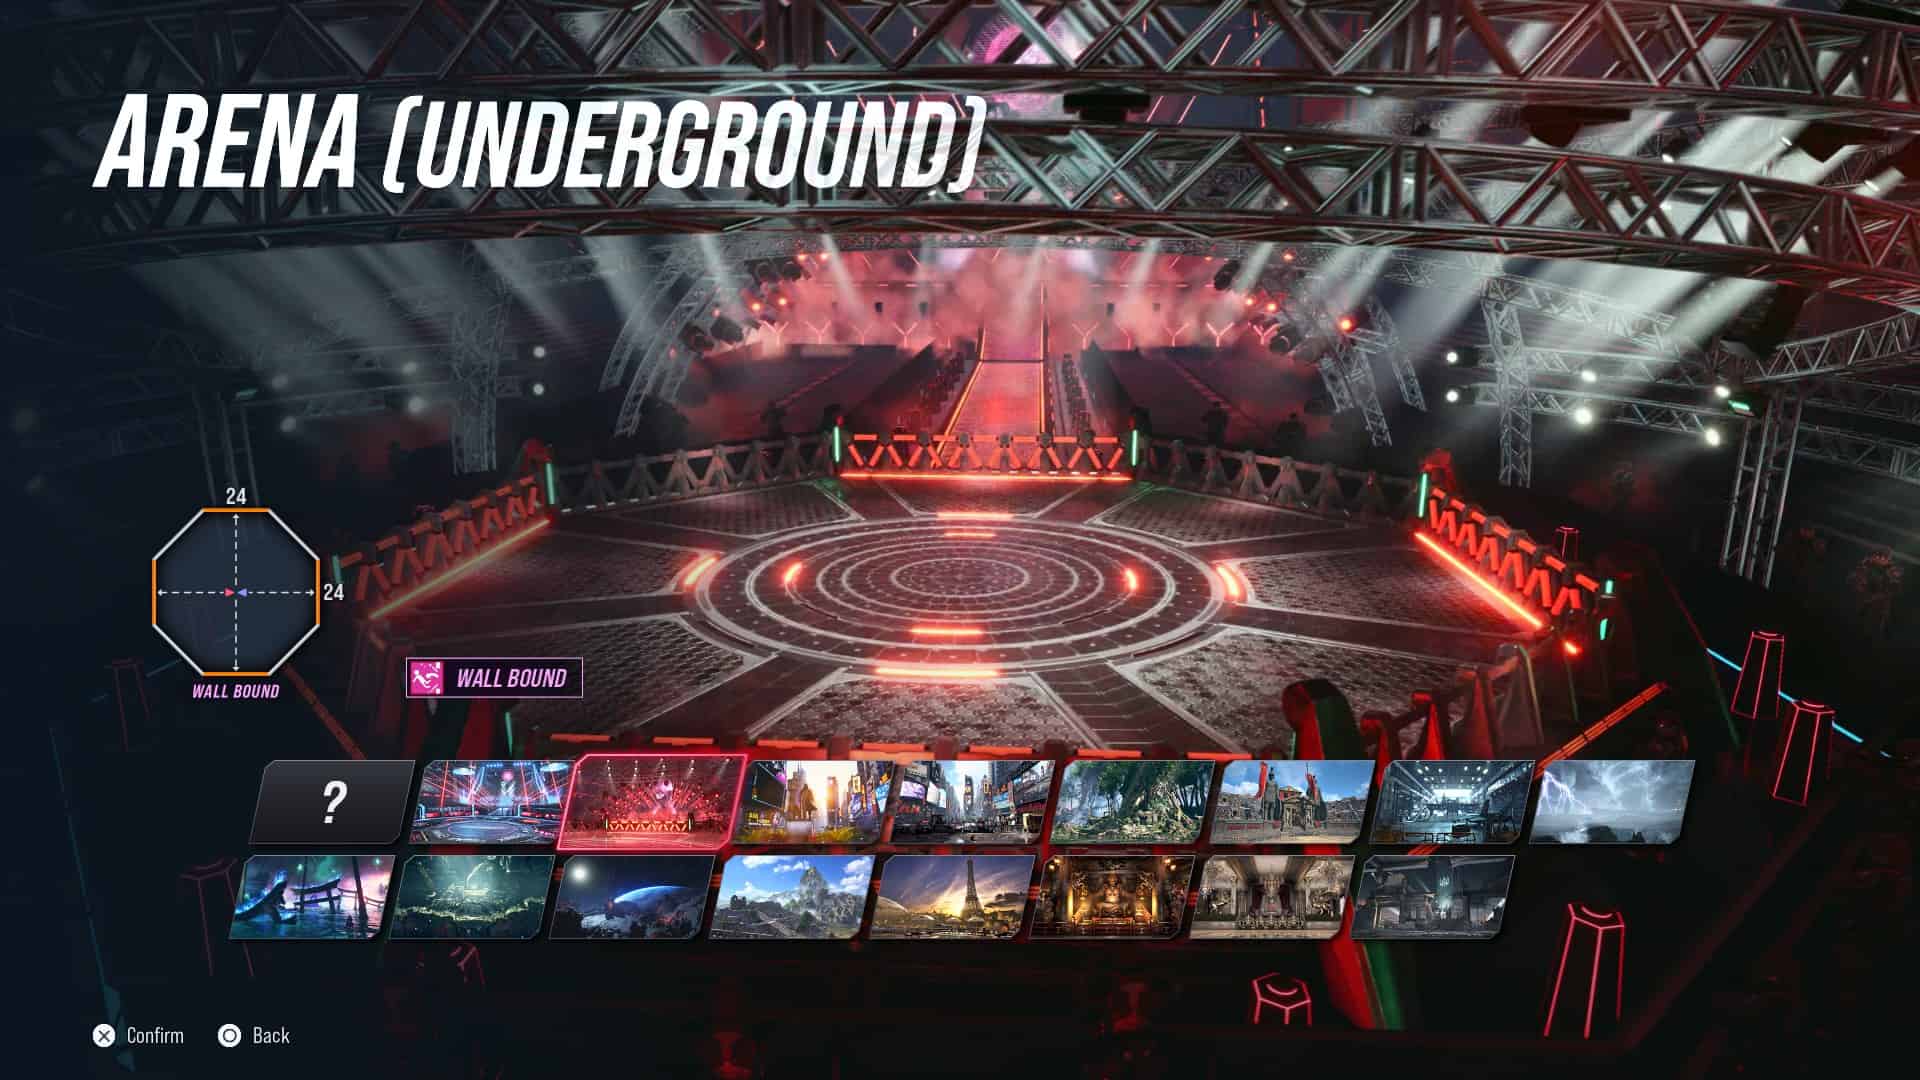 Tekken 8 stages: The Arena (Underground) stage in the stage select screen